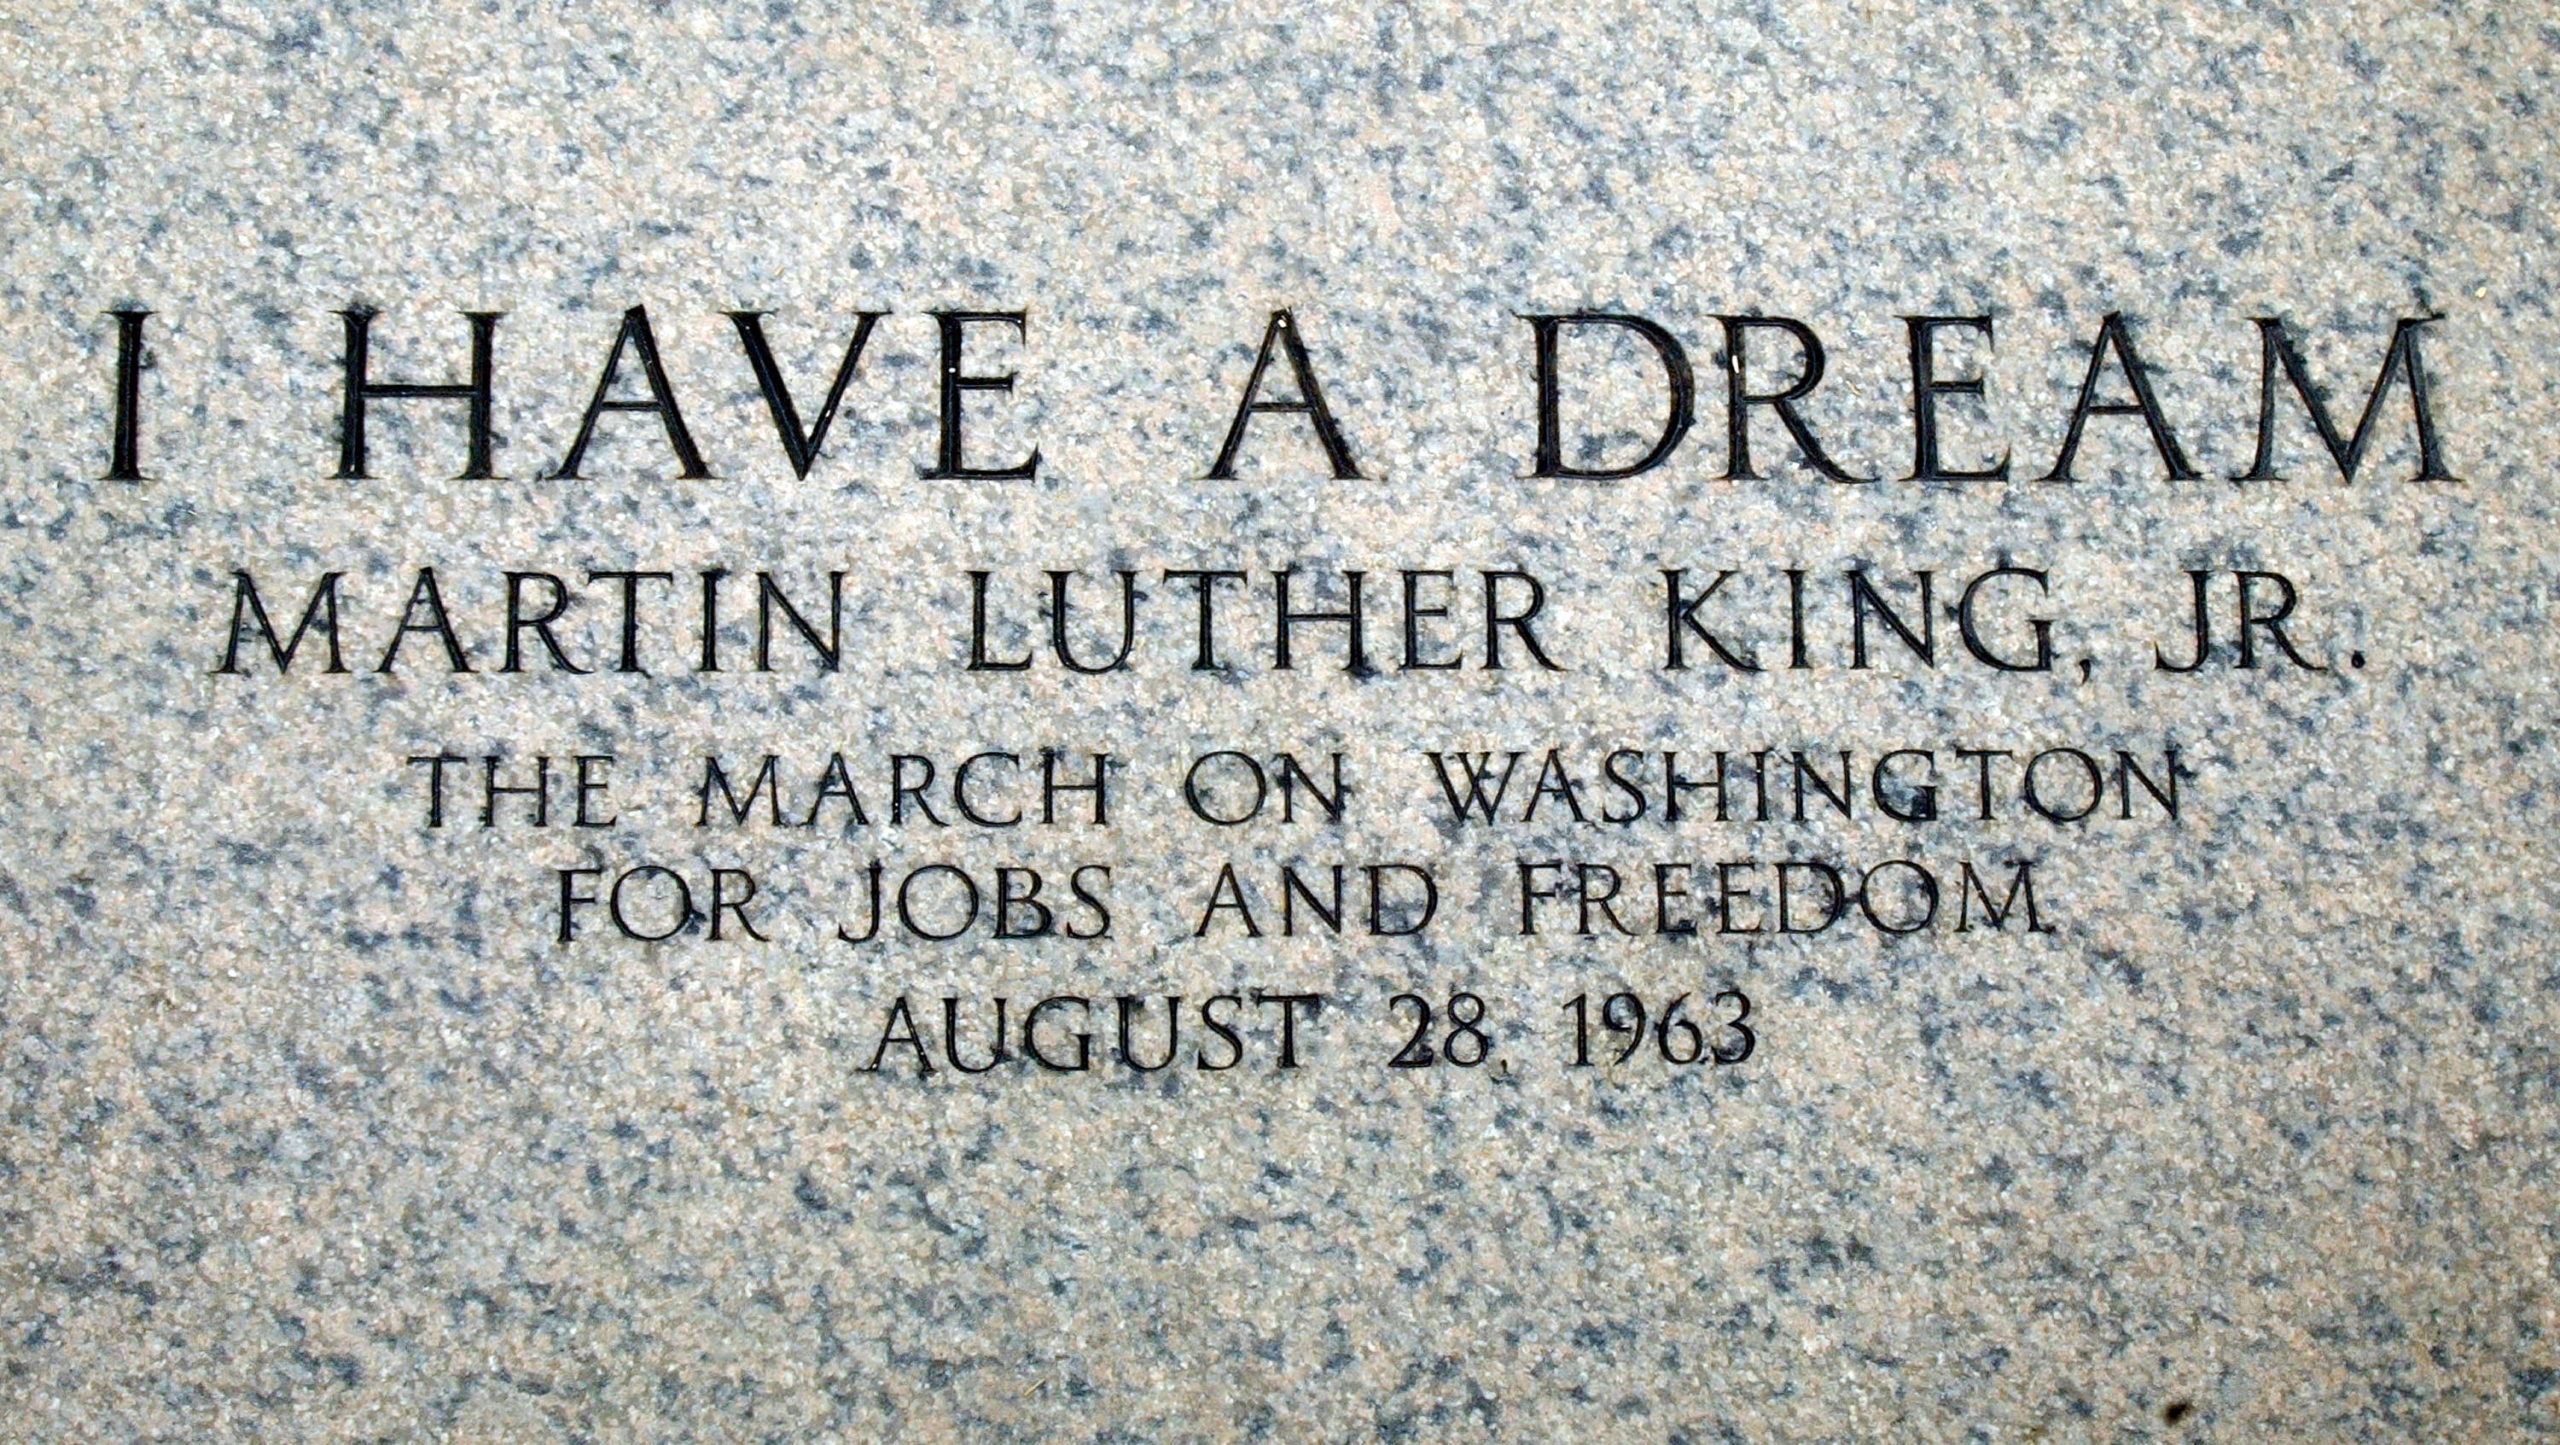 Martin Luther King Jr. Day | 93.3 WFLS